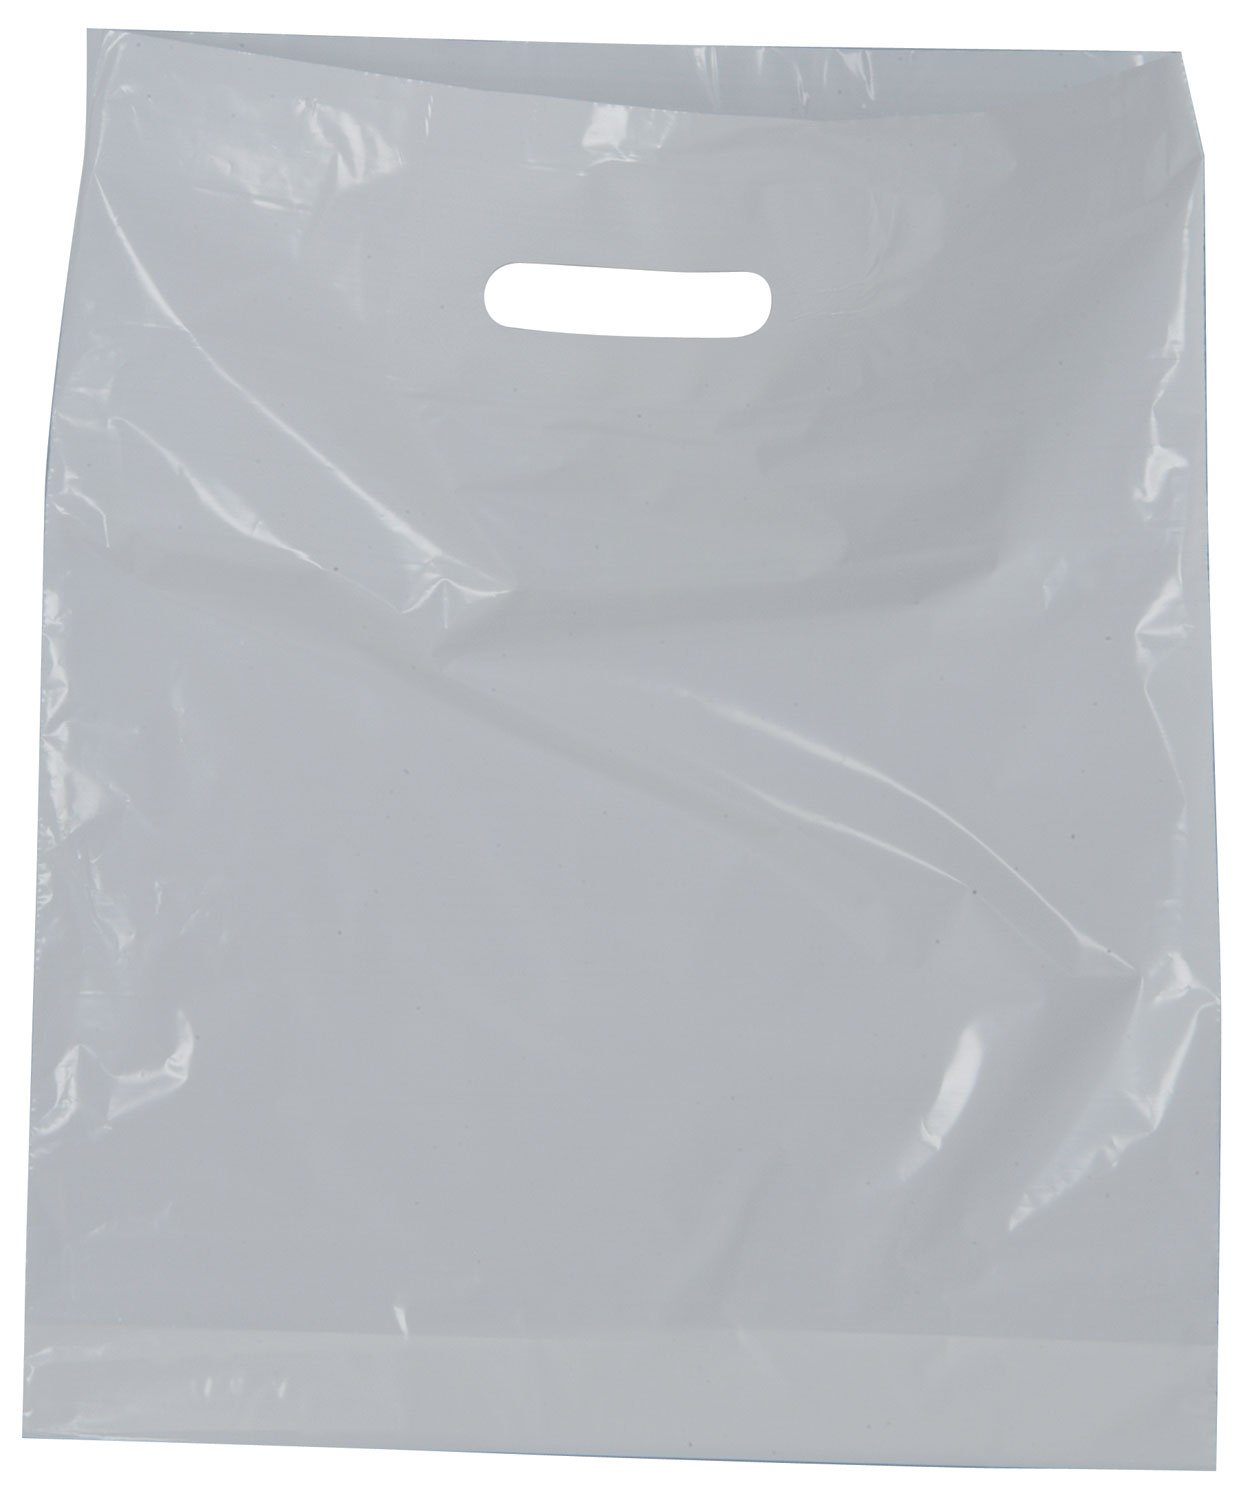 White Carrier Bag White Carrier Bag, 380 x 457 x 75mm (15" x 18" x 3 " approx), 30 microns